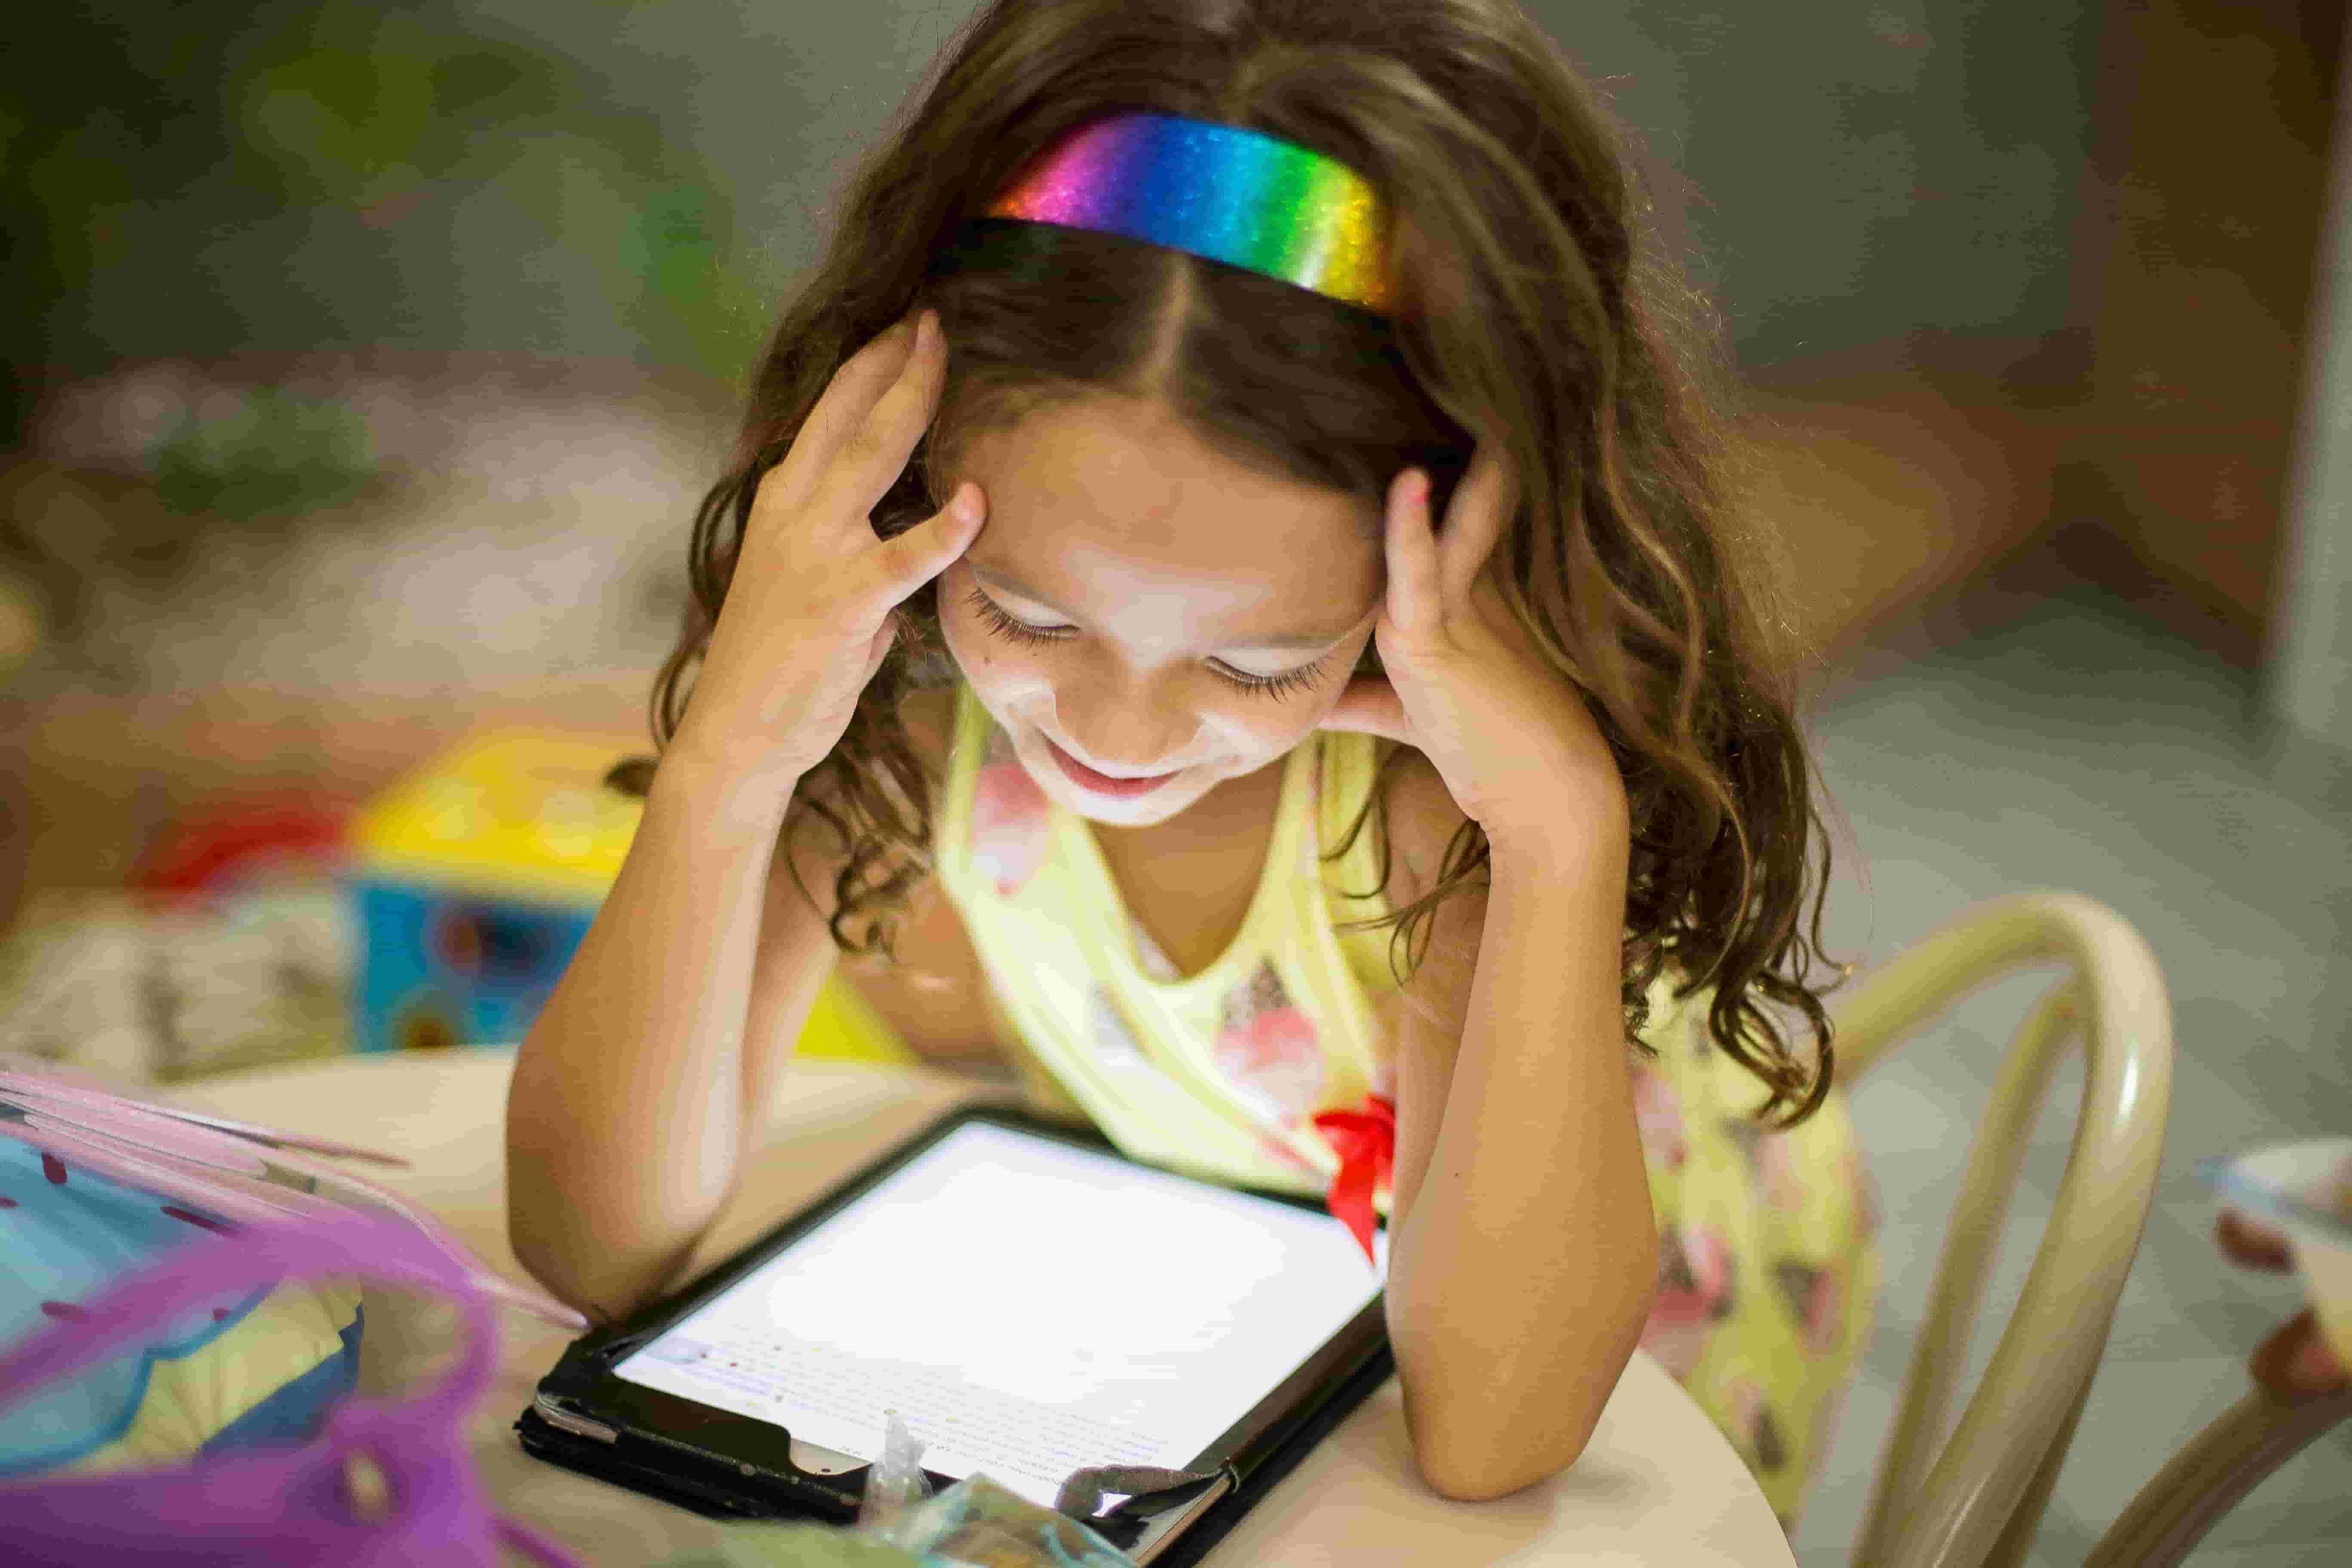 A child sits using a tablet by herself